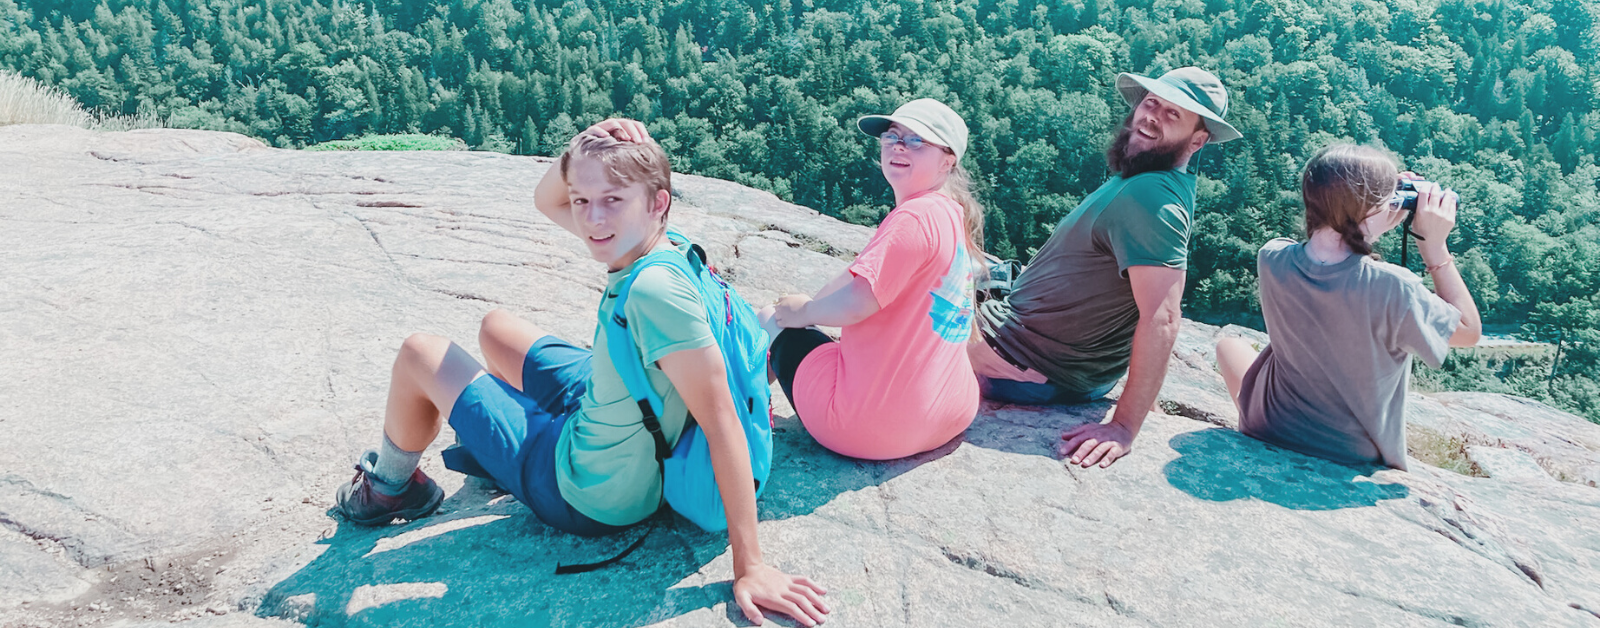 William, Penny, friend, and Marilee sit on a large rock with a forest far below them.